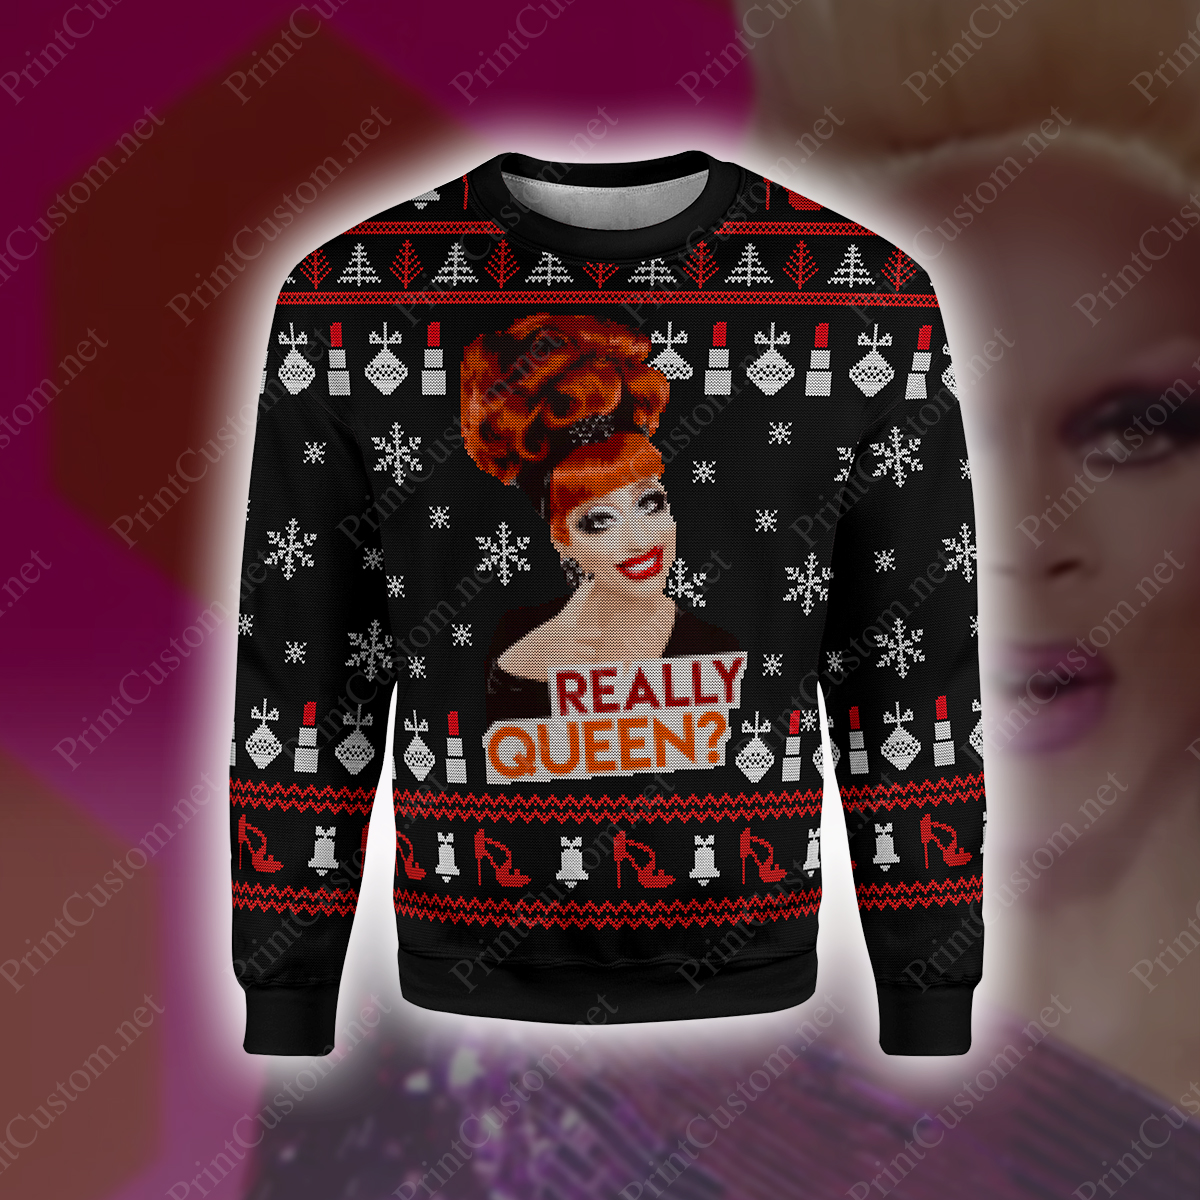 Really queen rupaul's drag race full printing ugly christmas sweater - maria